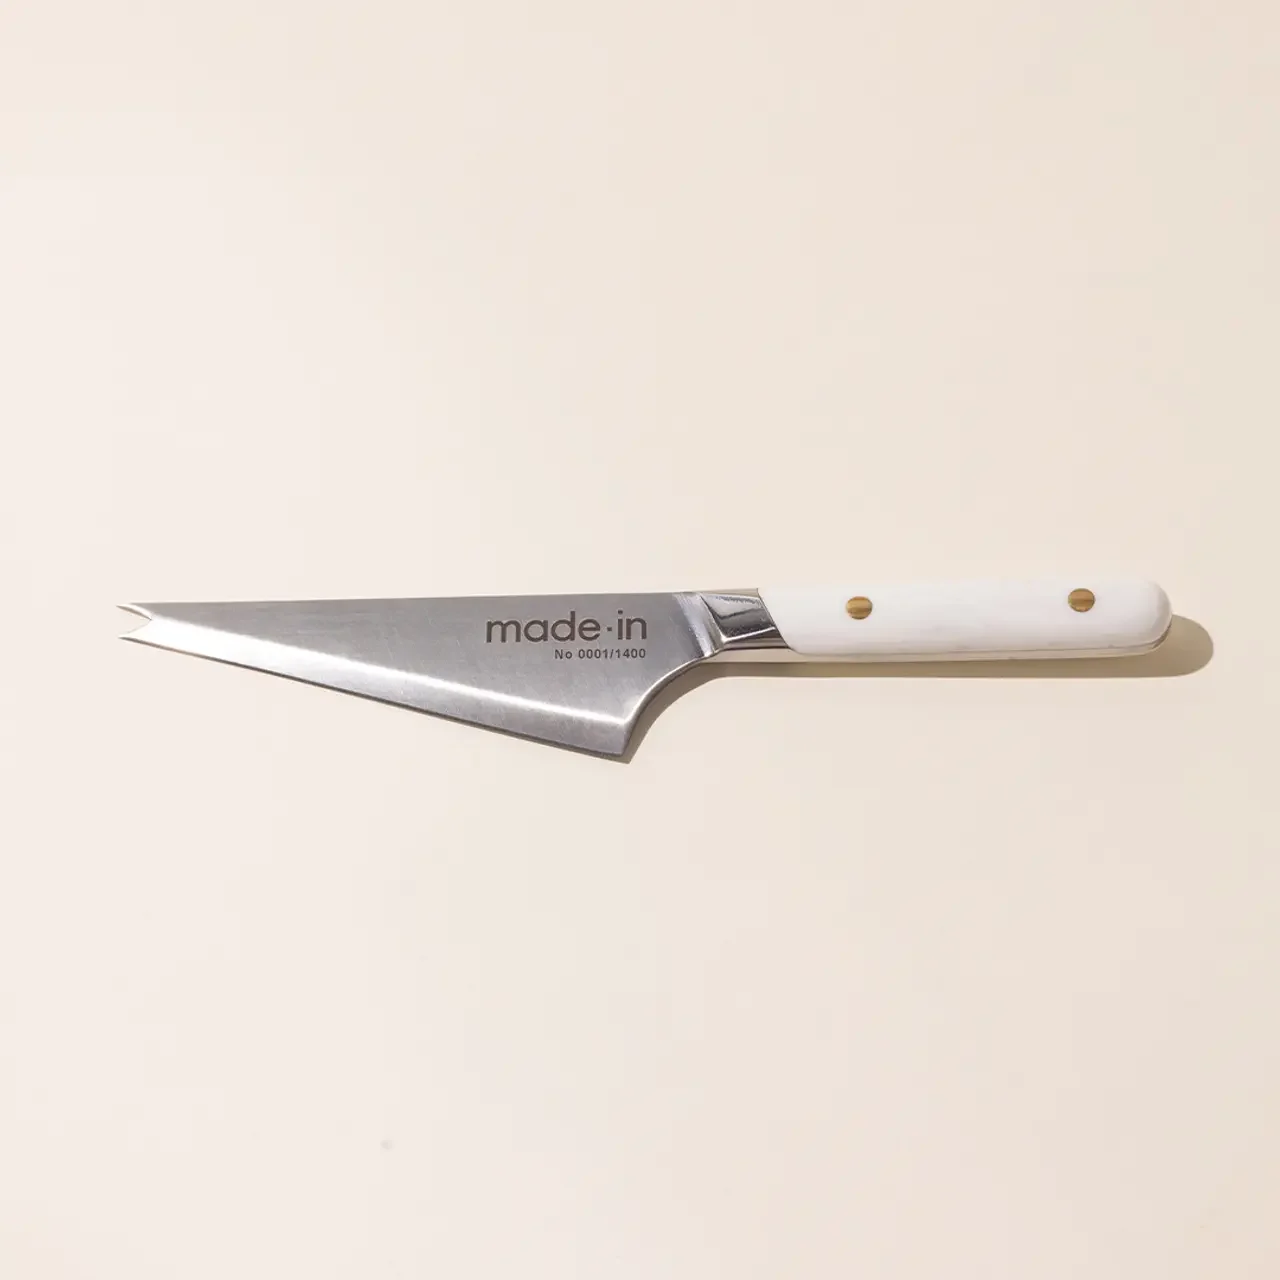 The 8 Best Cheese Knives of 2023, According to Our Tests